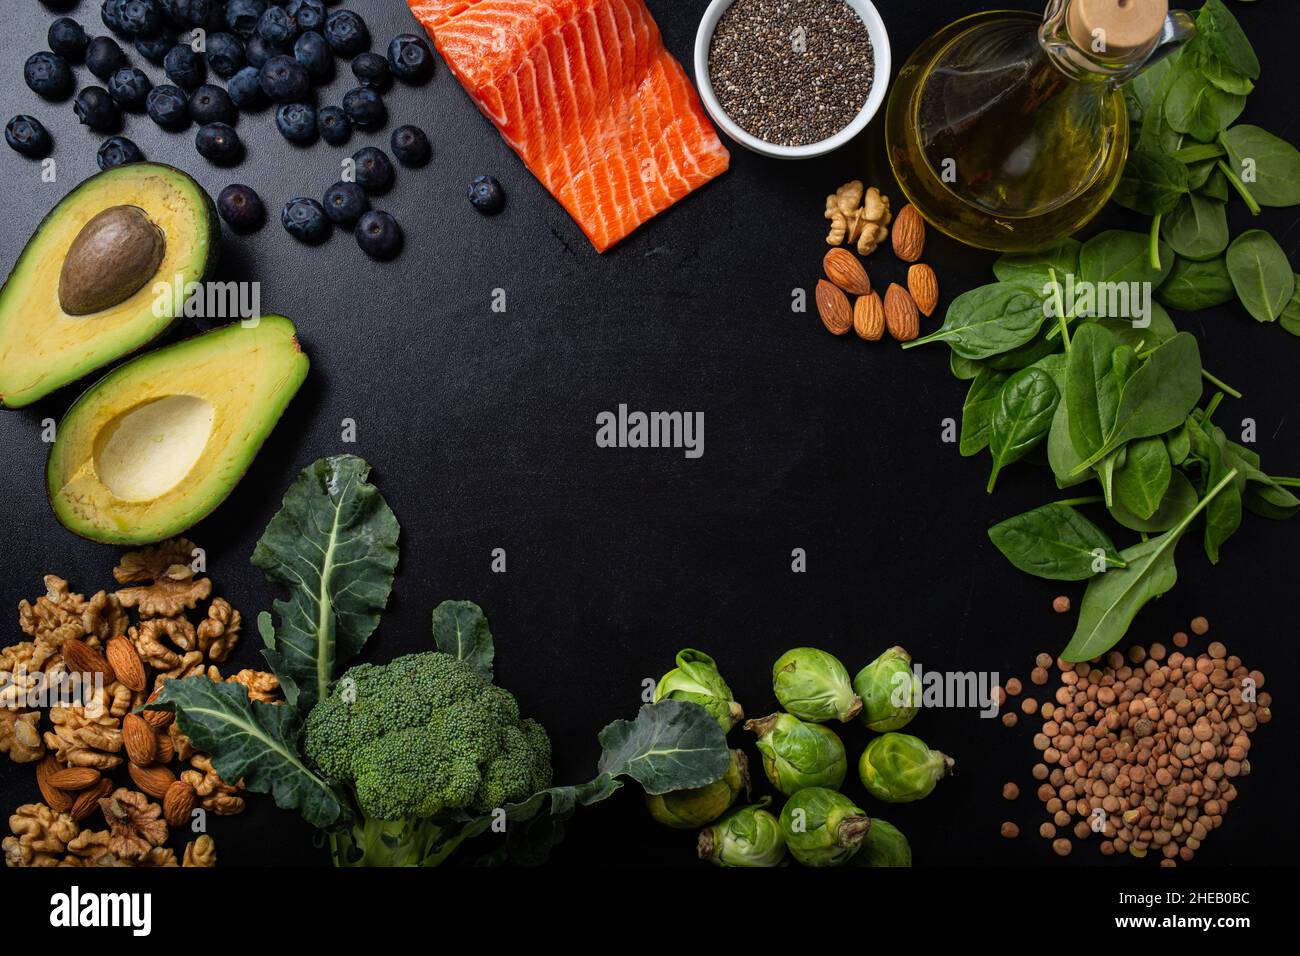 Healthy food background with good fat sources, ingredients rich in fatty acids Stock Photo